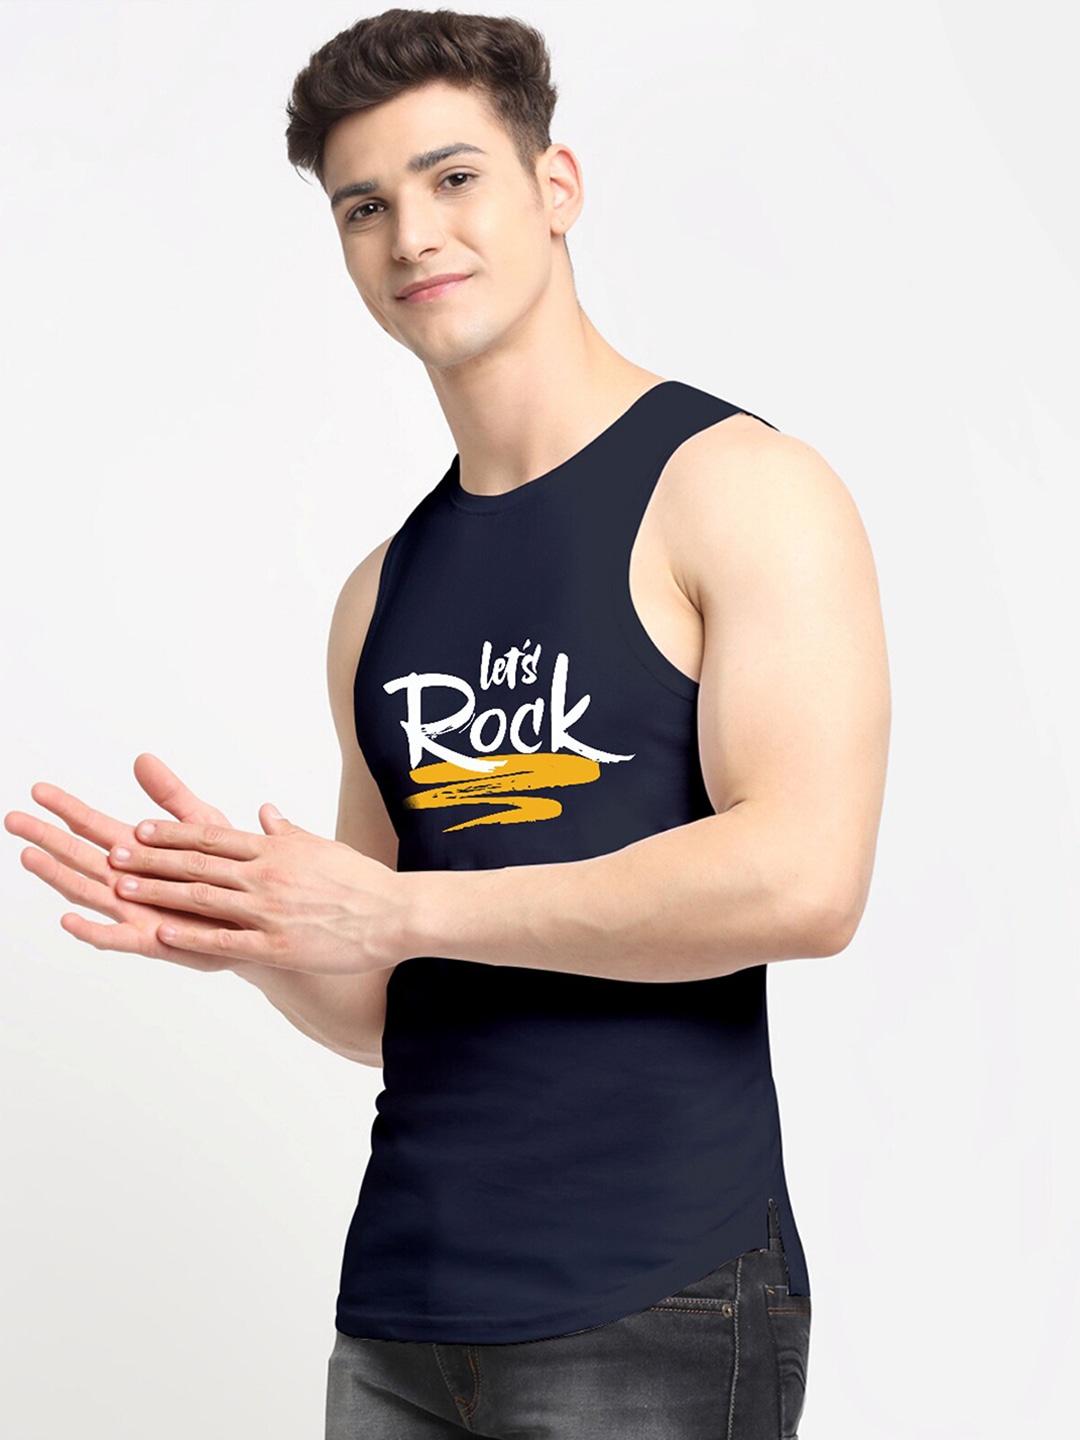 Clothing Innerwear Vests | Friskers Men Navy-Blue & White Printed Pure Cotton Gym Vest - DY17503